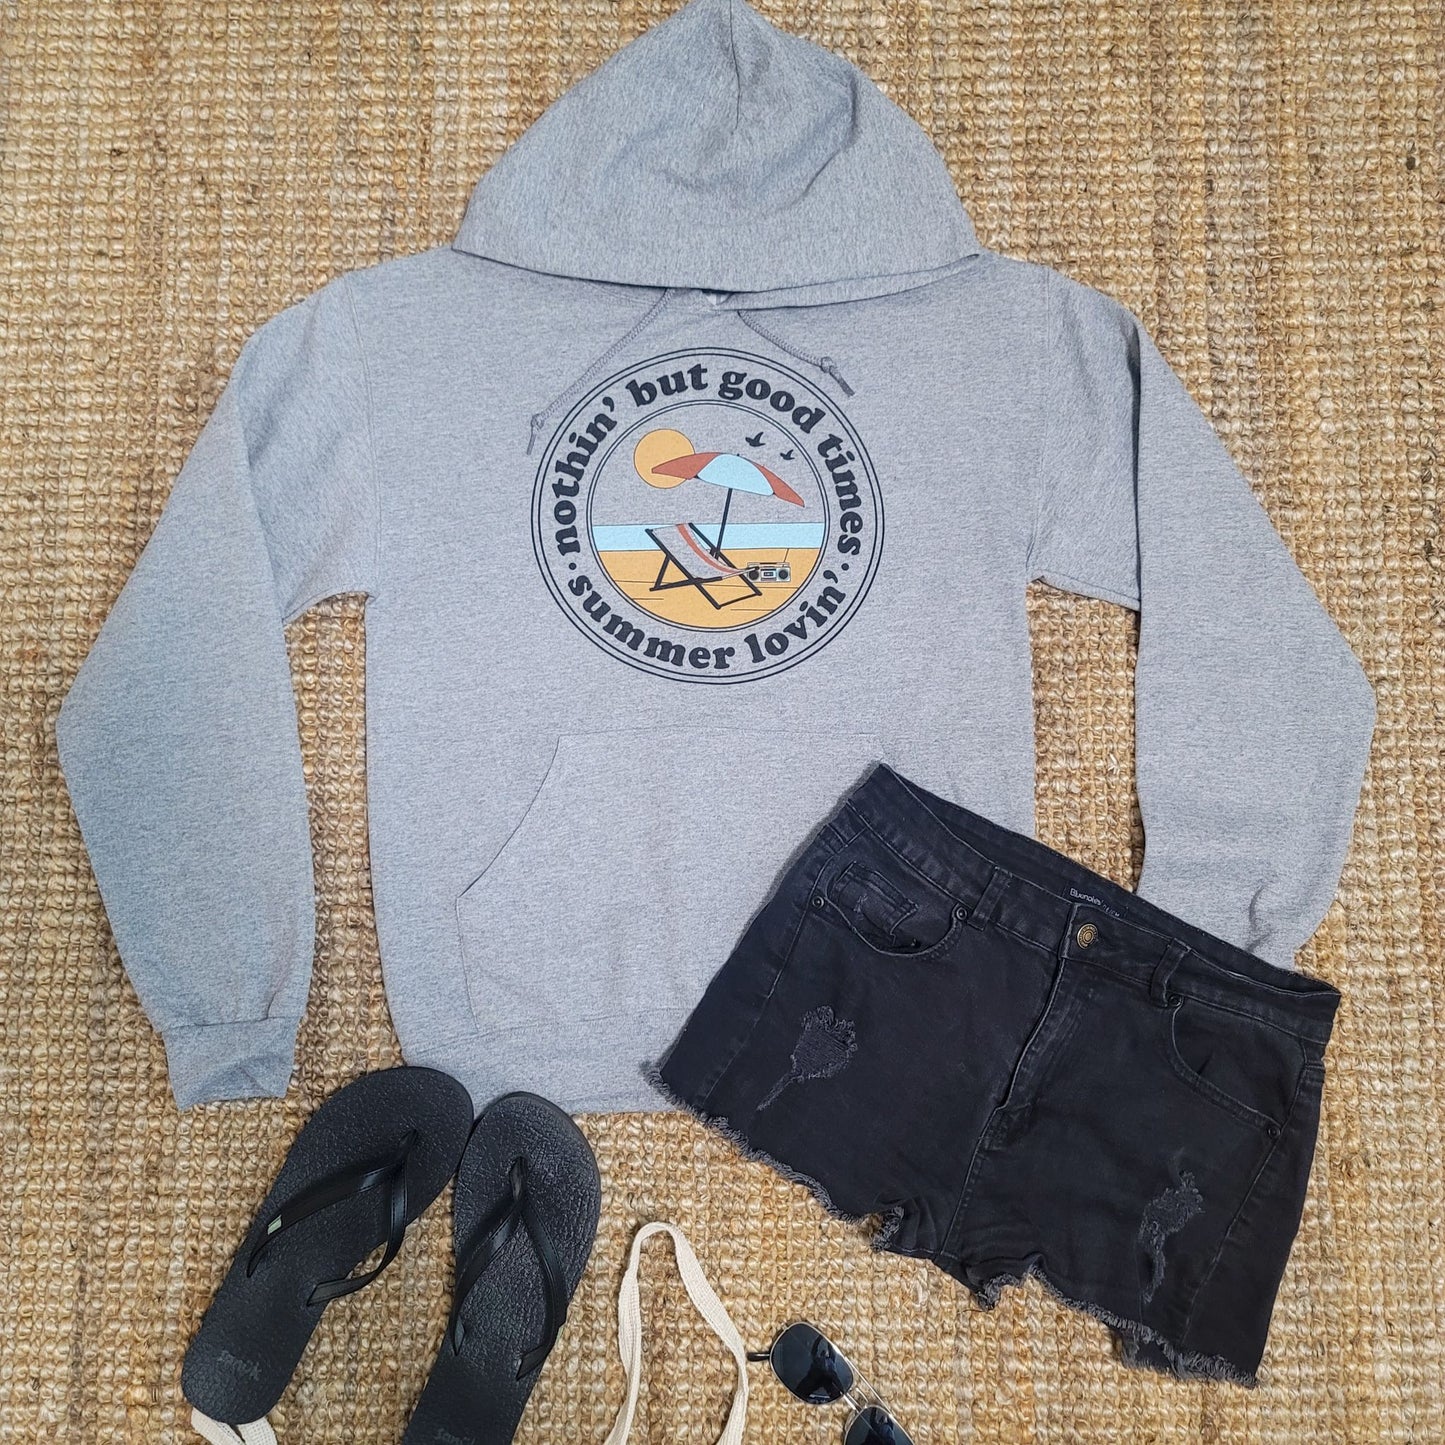 Nothin' But Good Times Hoodie - Grey